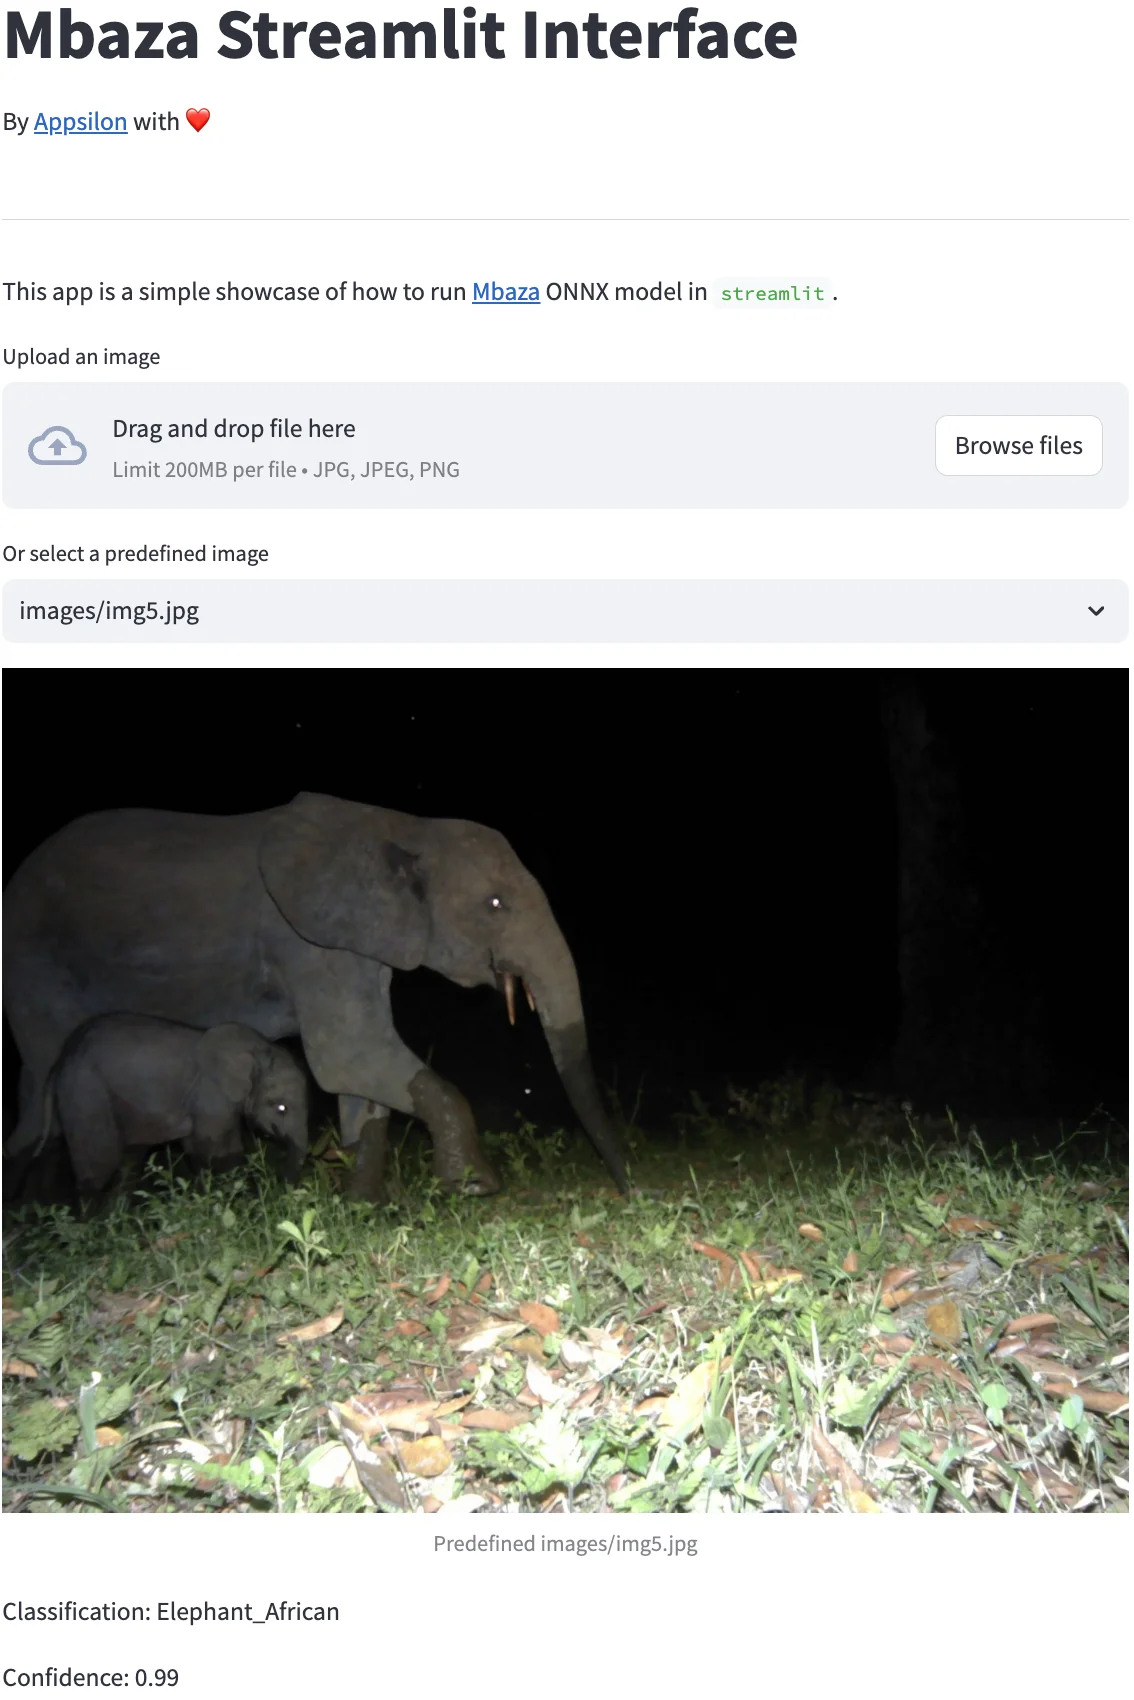 Mbaza Streamlit Interface showing an African Elephant identified with 99% confidence. 